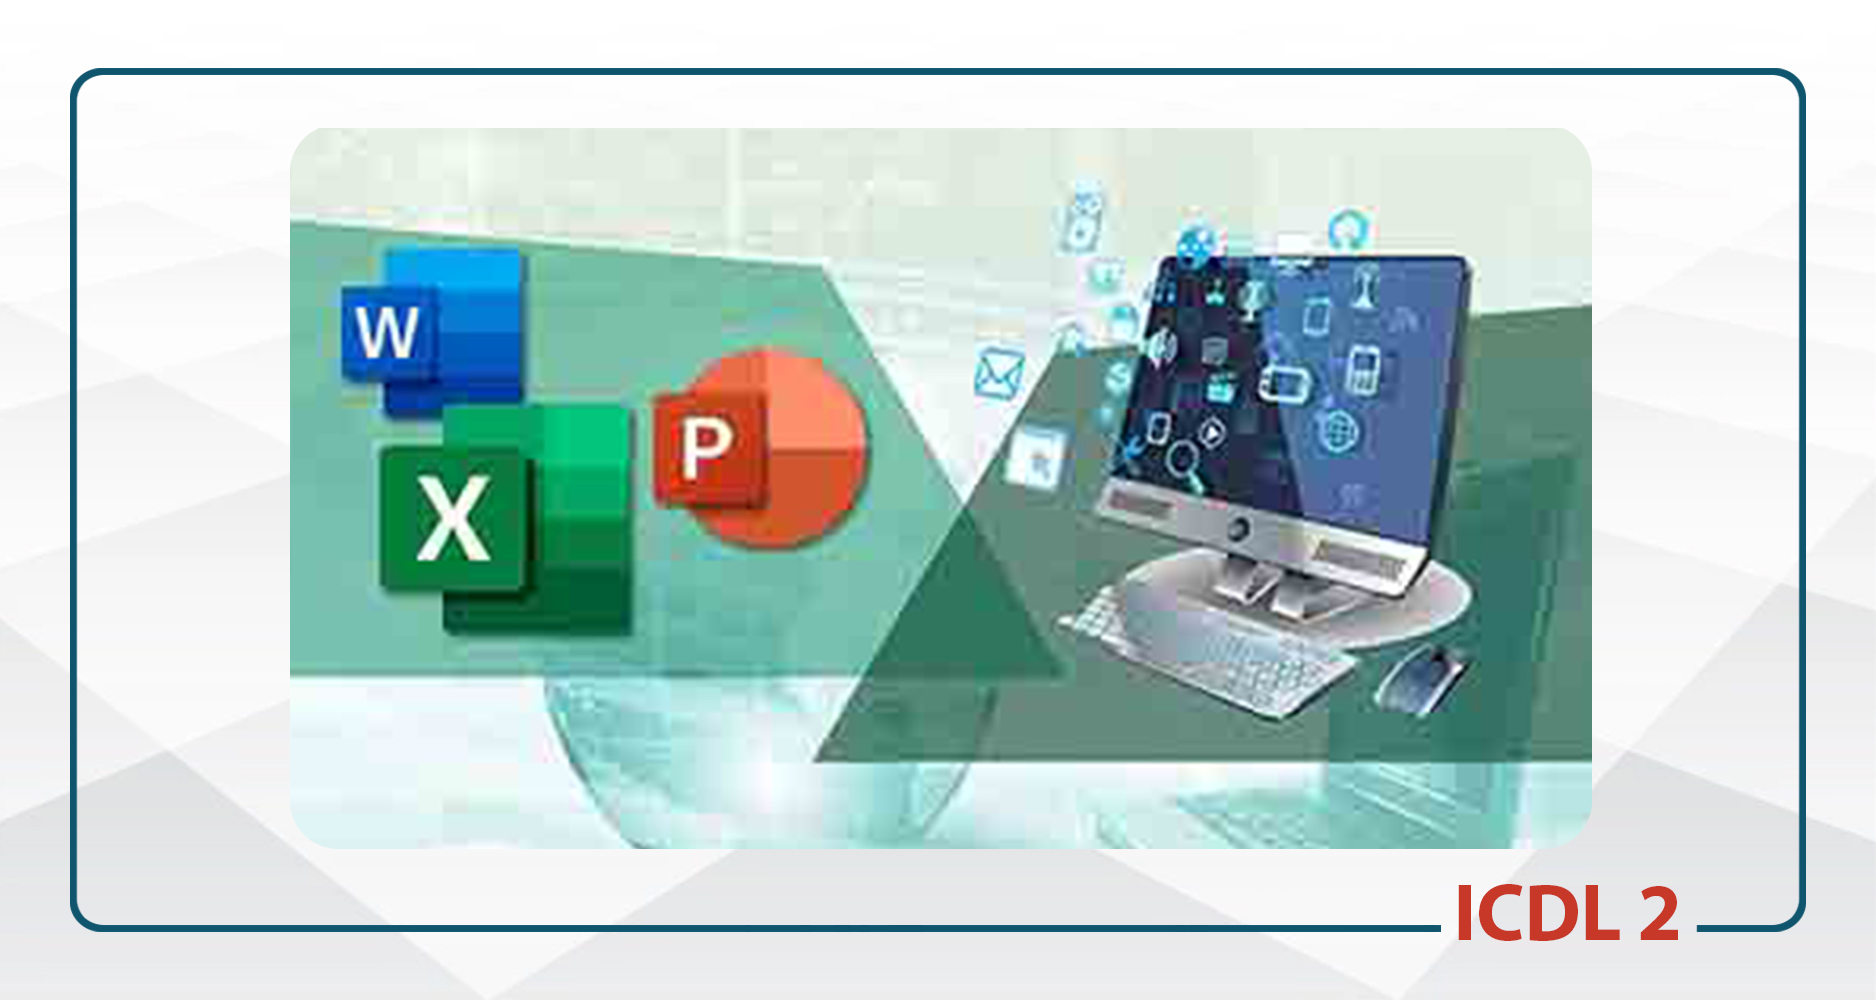 (ICDL٢) Word,Excel,PowerPoint,Access - يكشنبه سه شنبه 13-9*مالی